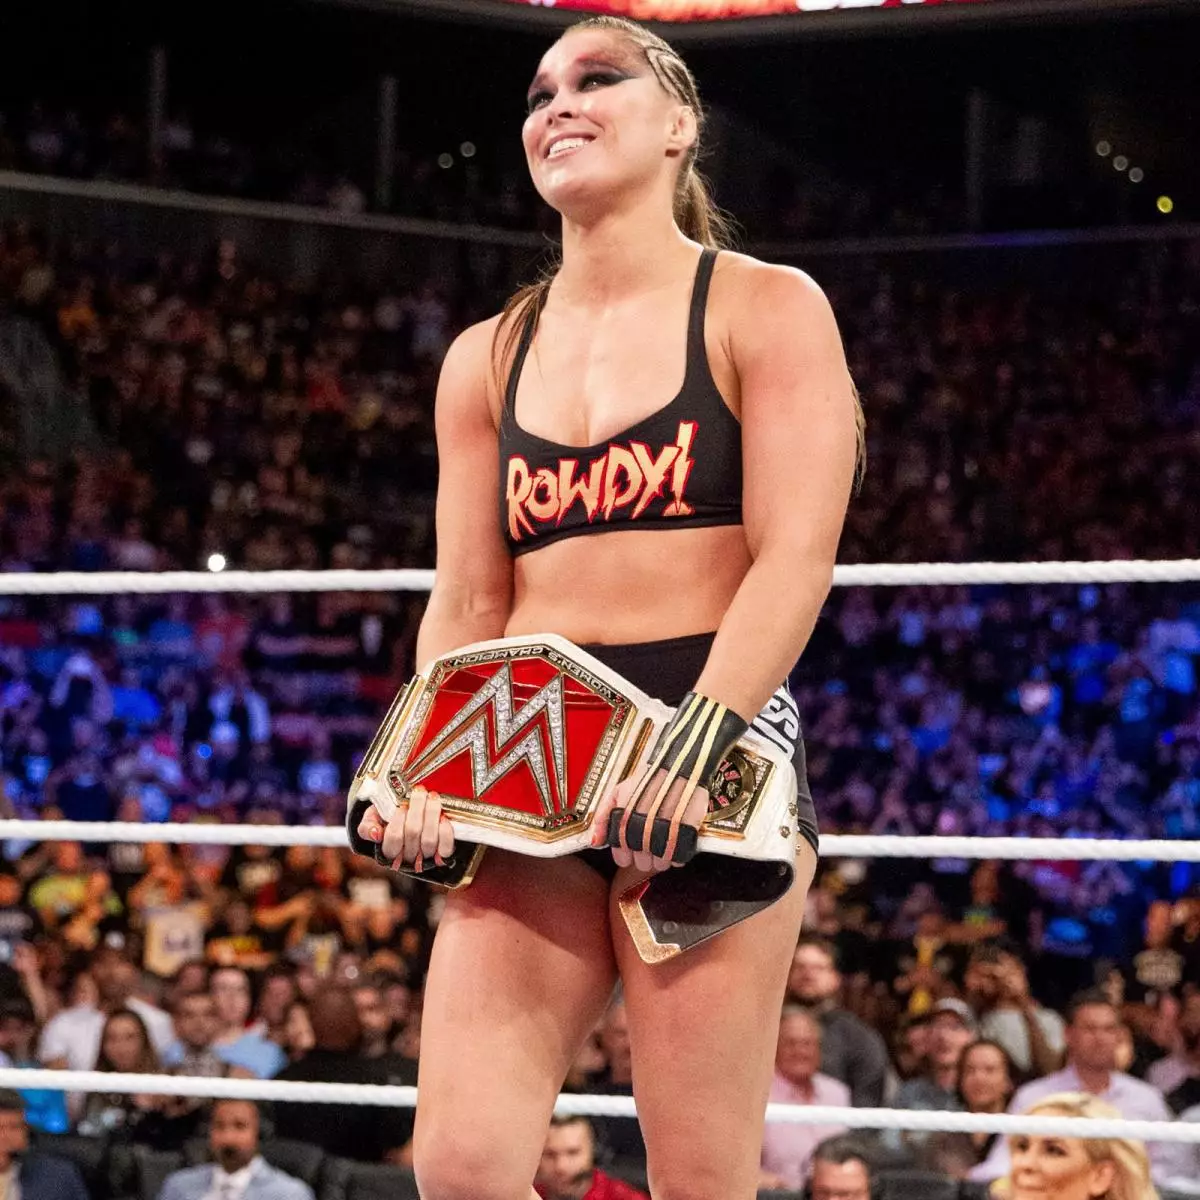 Rousey wins her first WWE title. Image: WWE